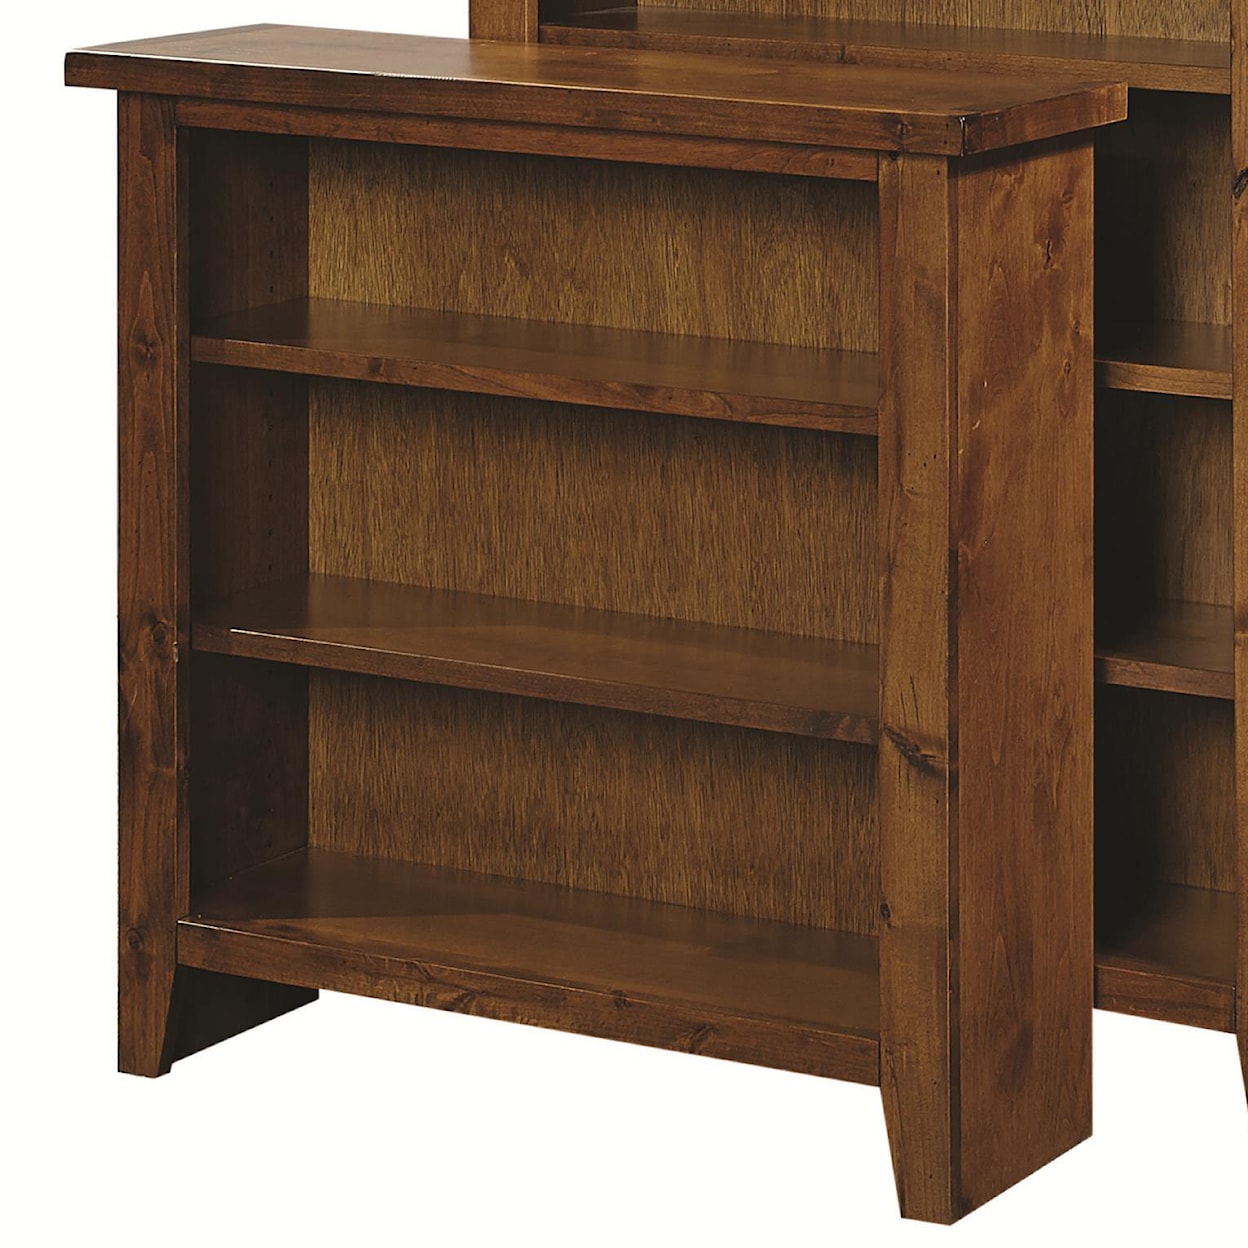 Aspenhome Alder Grove 36" Height Bookcase with 2 Shelves